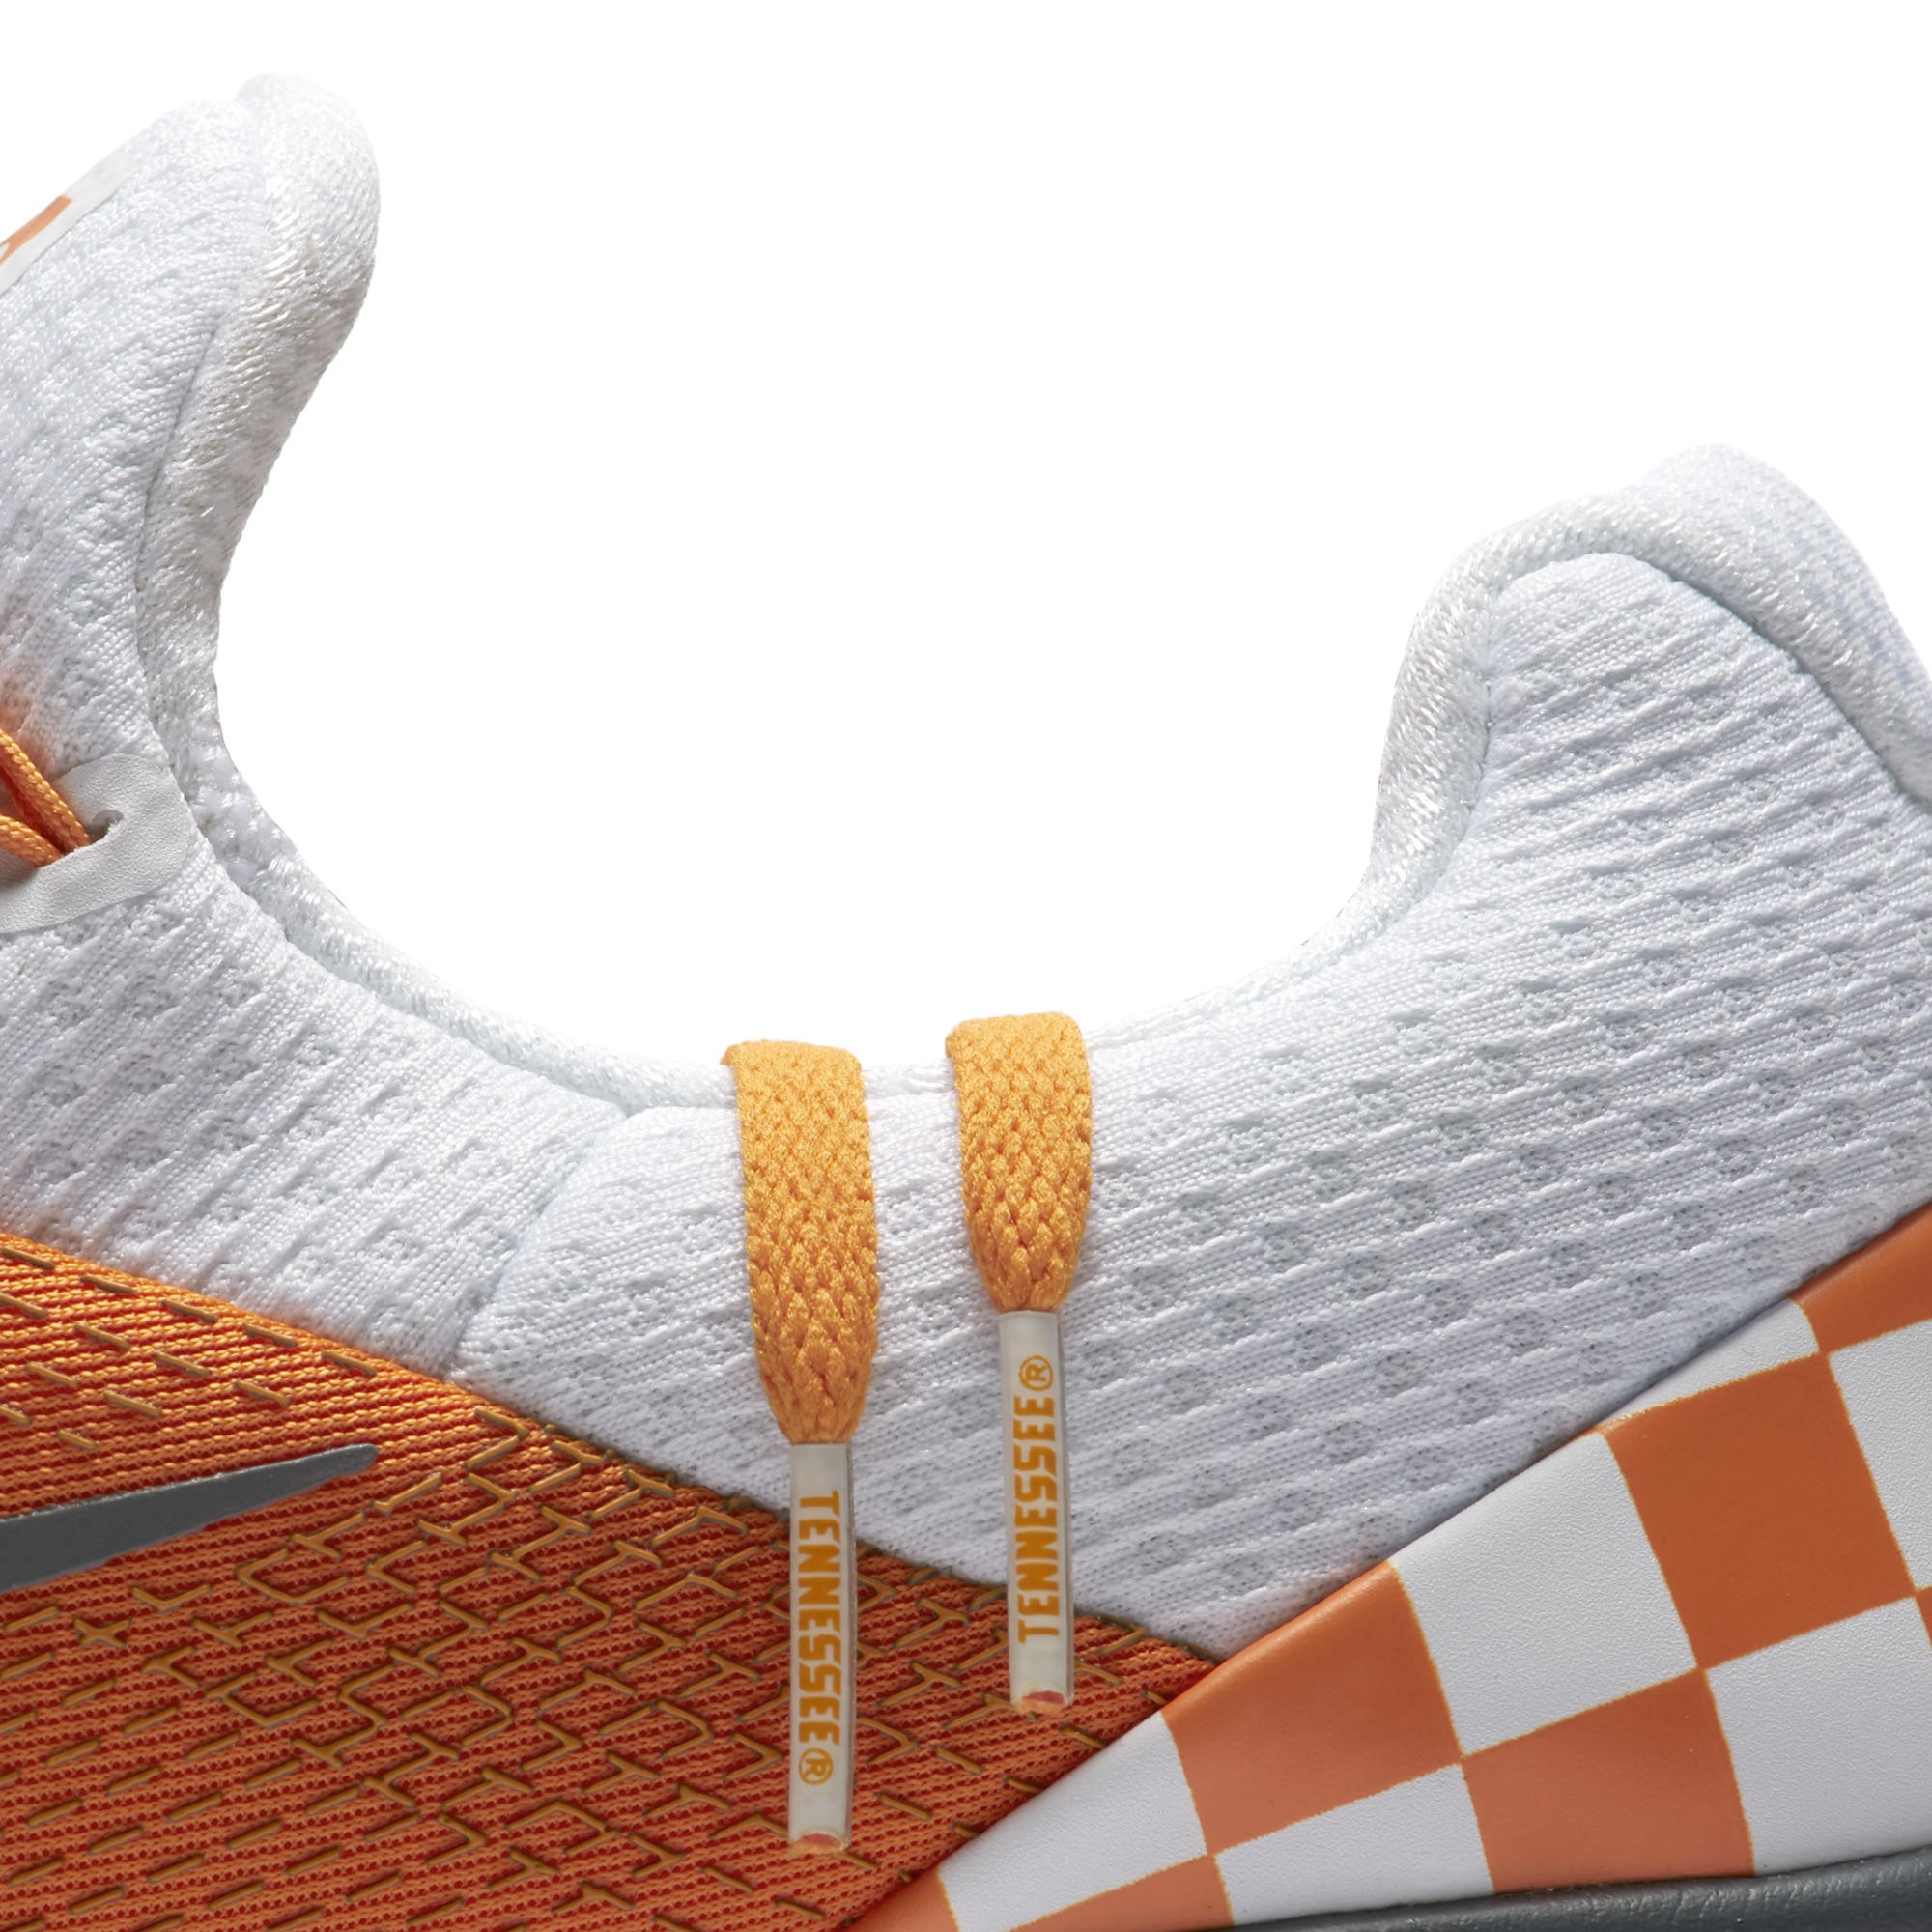 New Tennessee Nike shoes on sale Monday at 10 am